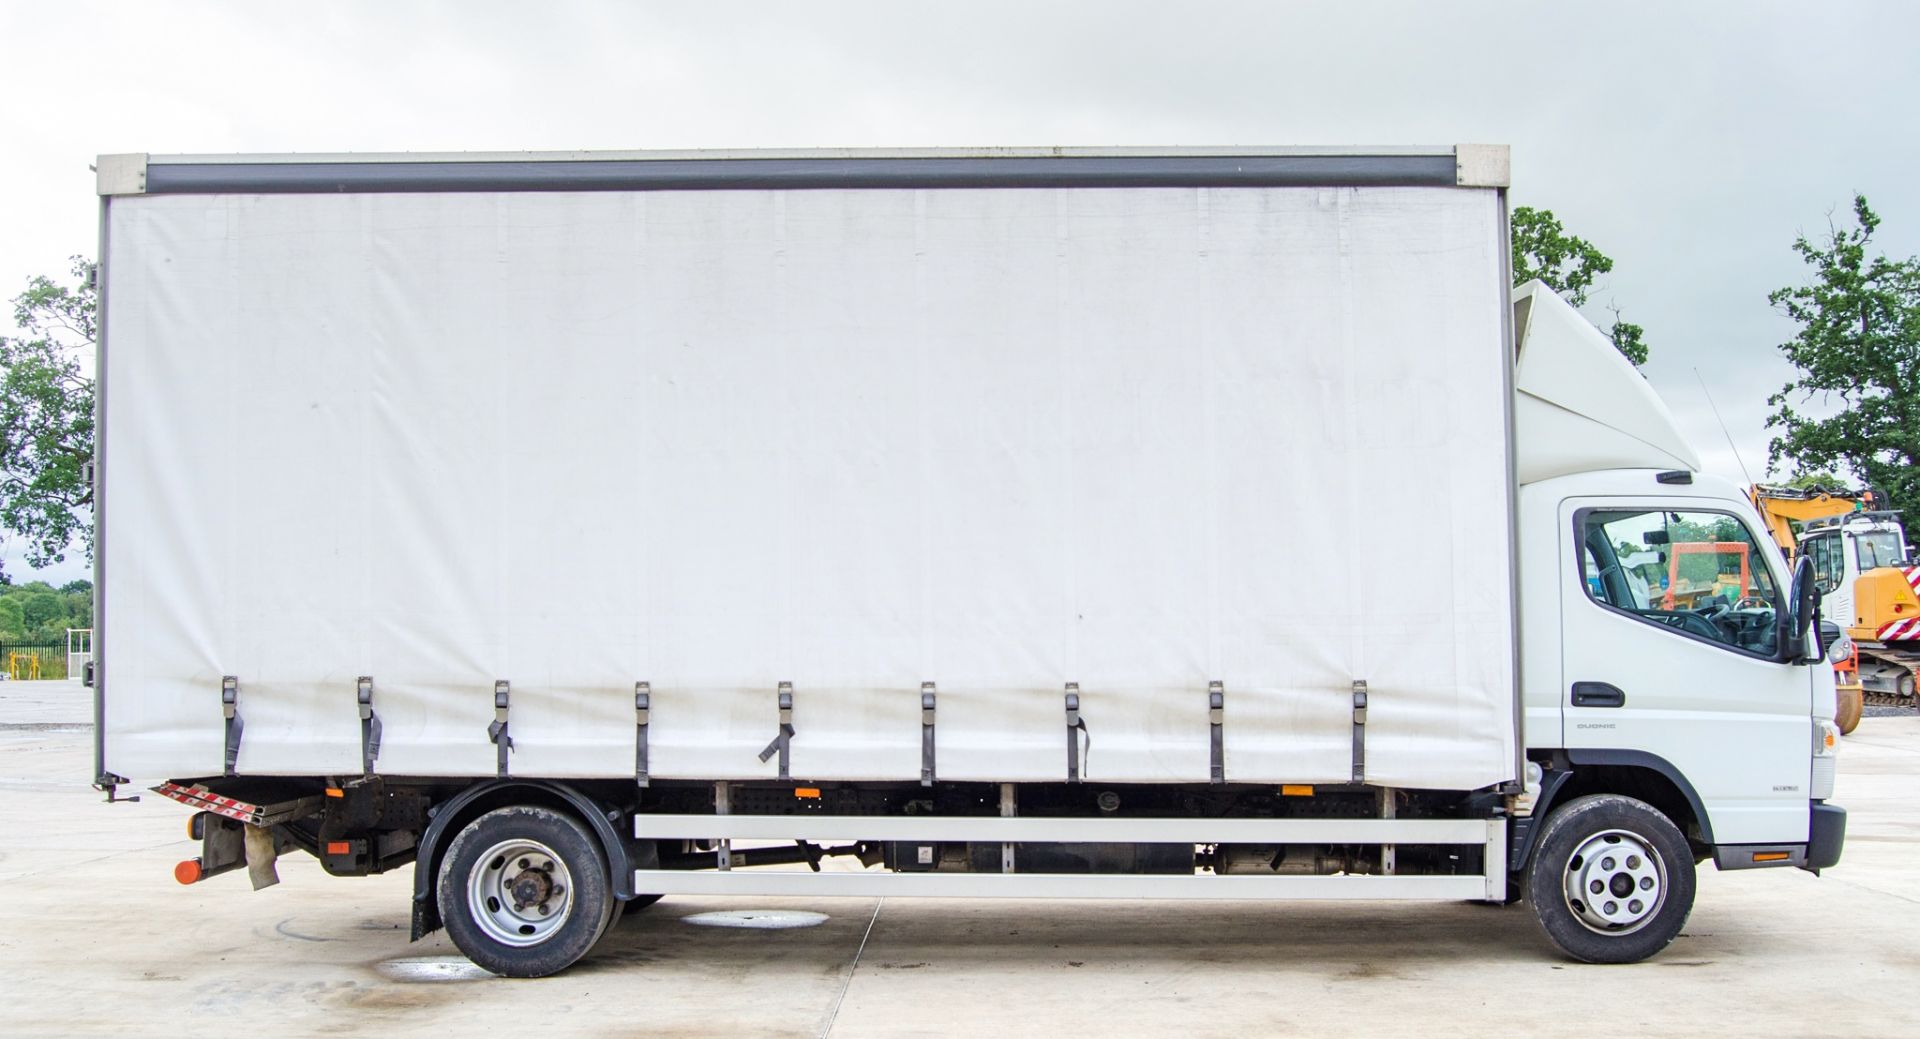 Mitsubishi Fuso Canter 7C15 Duonic 7.5 tonne automatic curtain sided lorry Registration Number: LN70 - Image 8 of 26